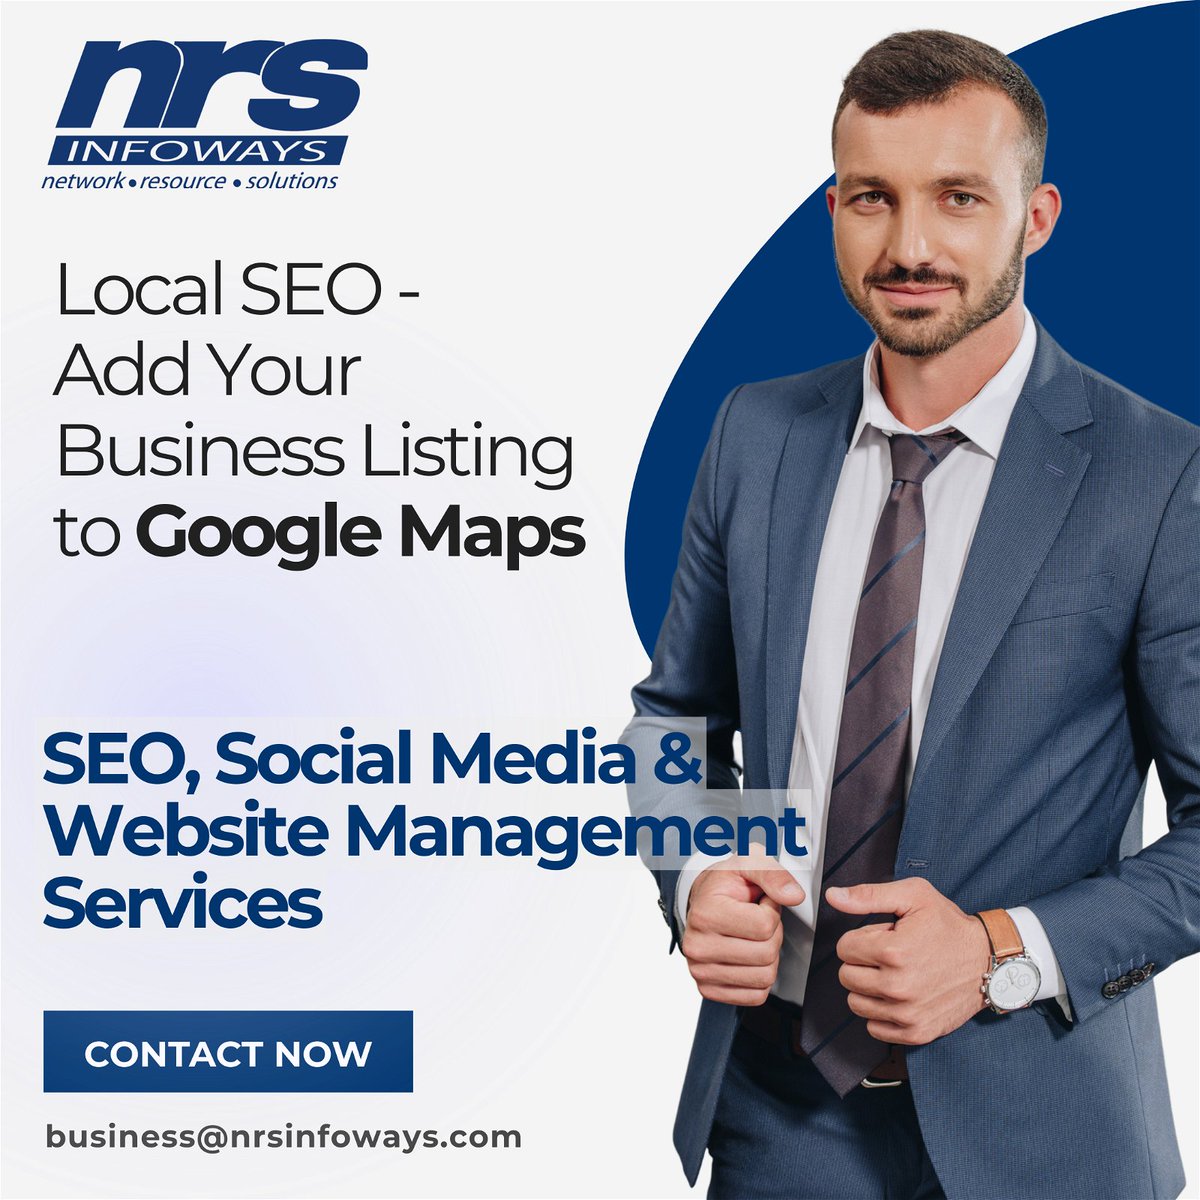 Add Your Business Listing to Google Maps

If you haven’t yet added your business to Google Maps, it’s time. Make sure your profile is as detailed as possible.

We can help
Lets discuss business@nrsinfoways.com
#googlemaps #businesslisting #digitalmarketing #nrsinfoways #seo